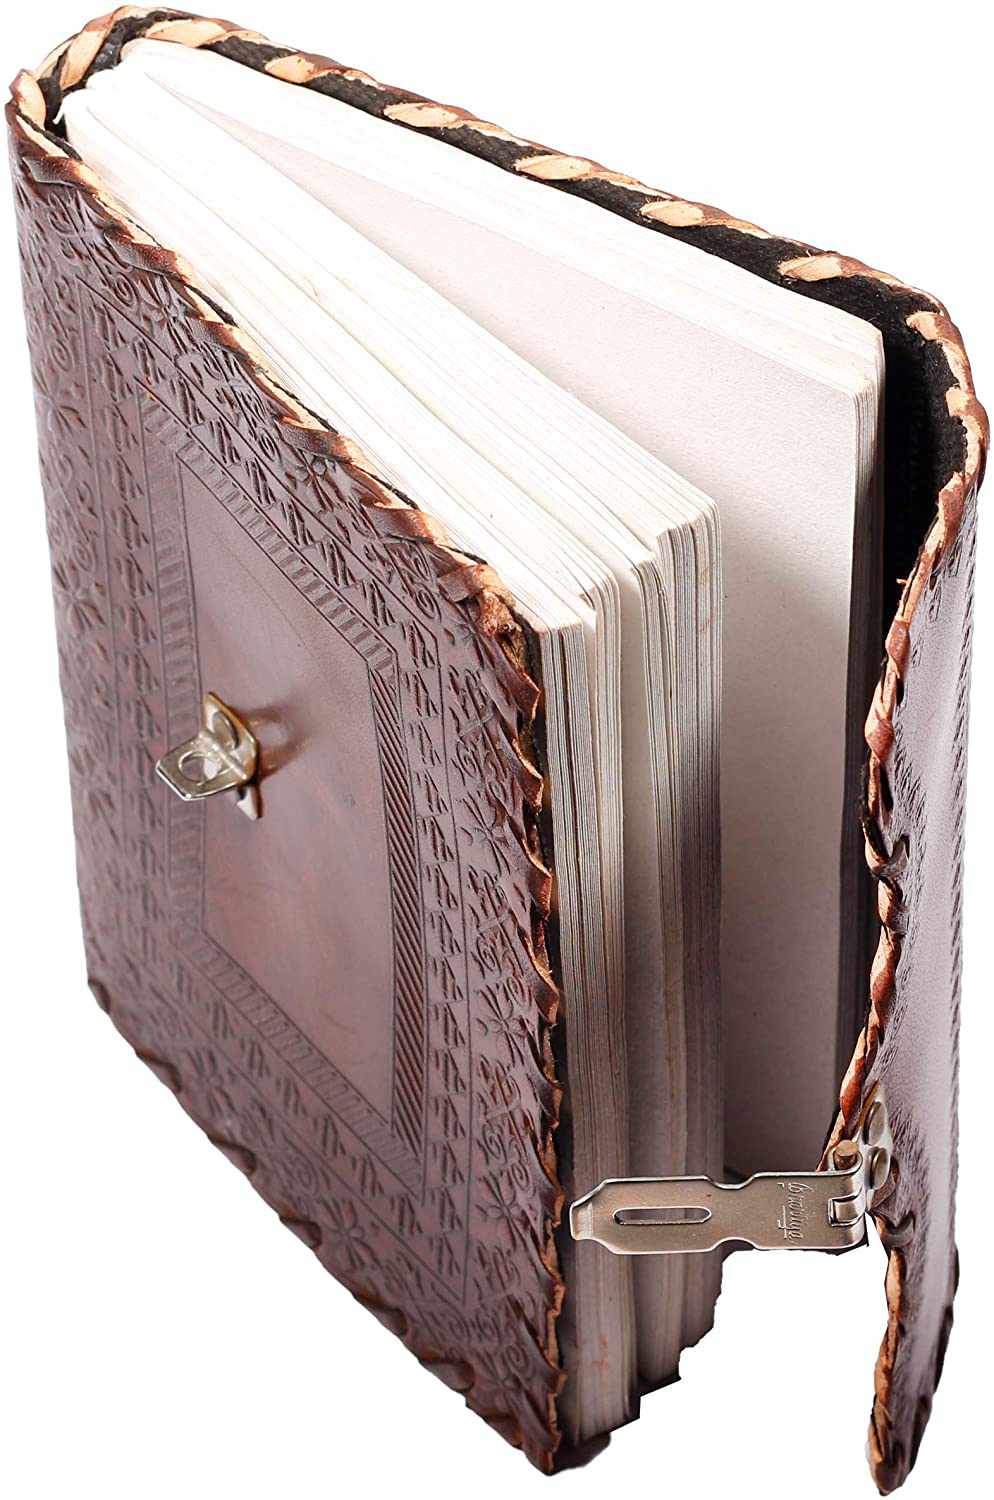 TUZECH Leather Journal for Men and Women Leather Diary to Write